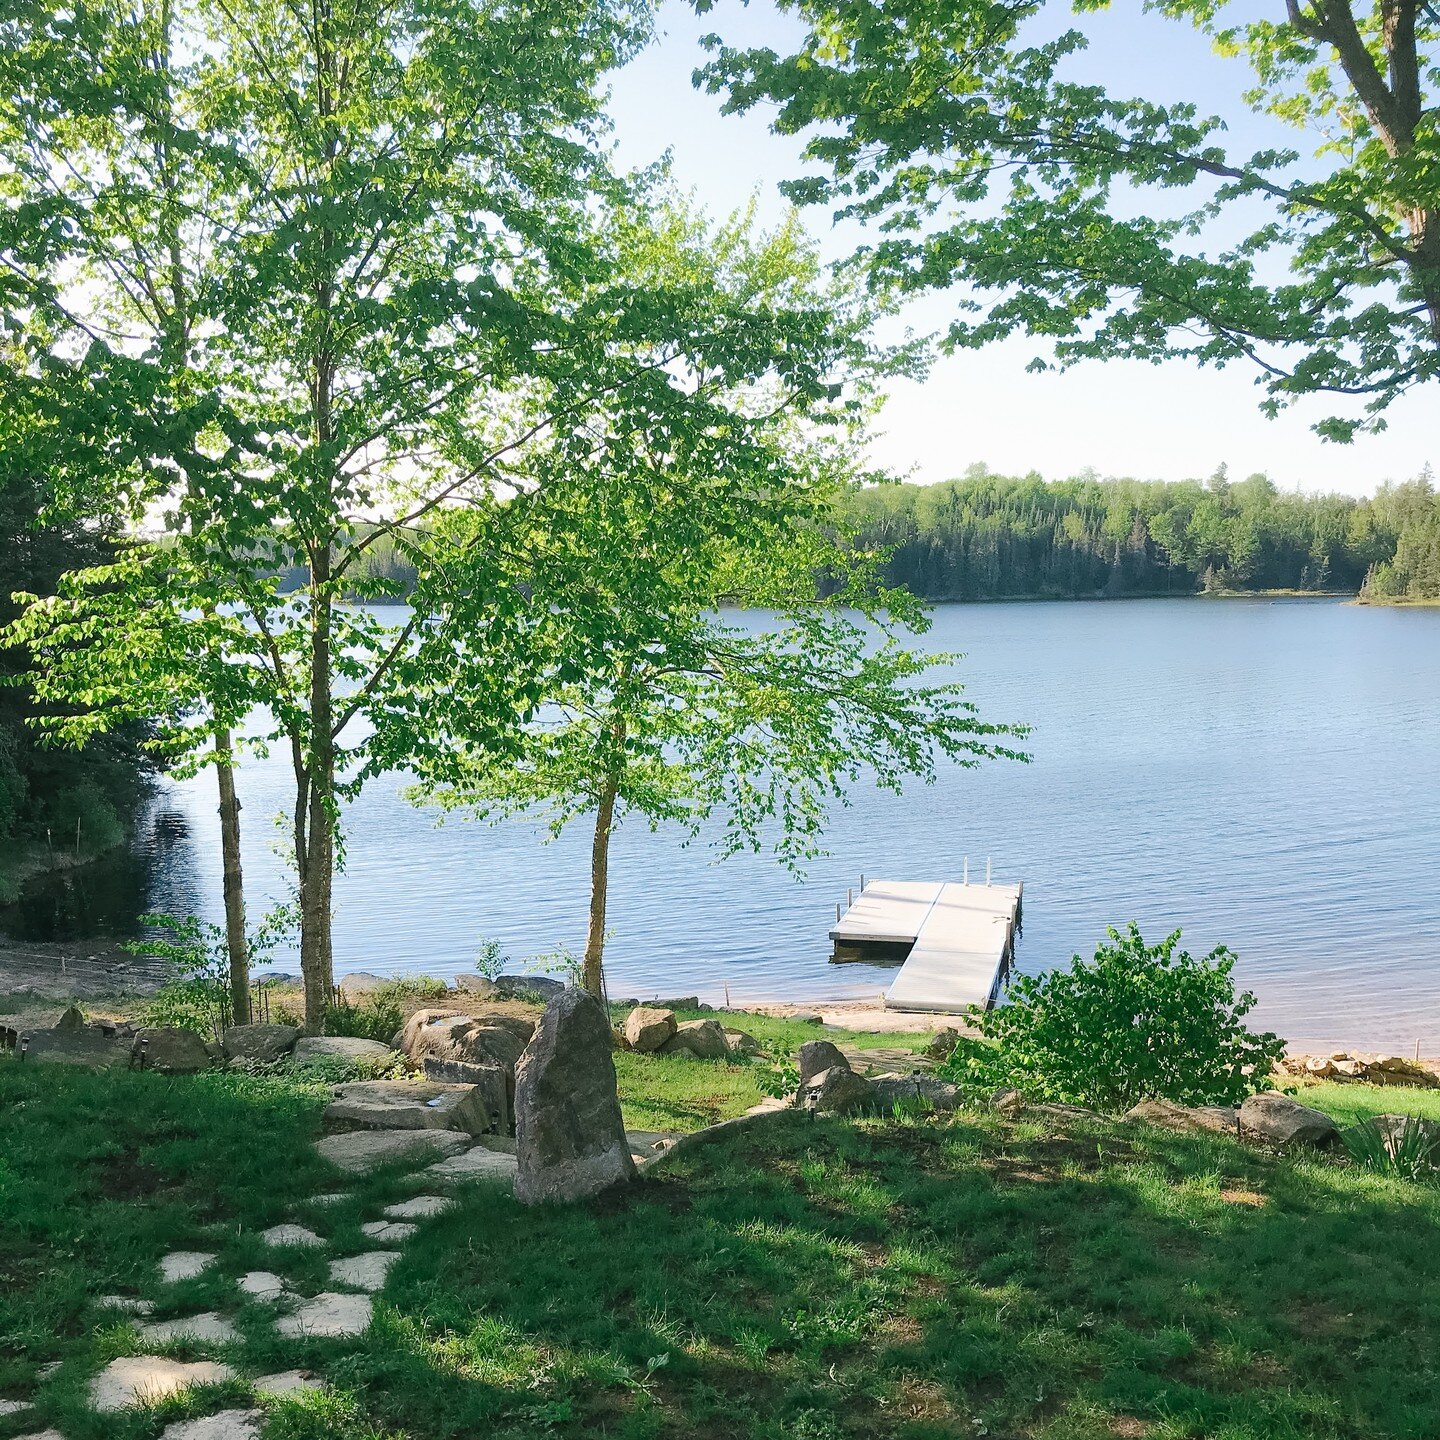 picture this, it's Saturday morning, you walk outside with your fresh brew to the peaceful sound of birds chirping and the ripples of the lake. Does it get any better than that?